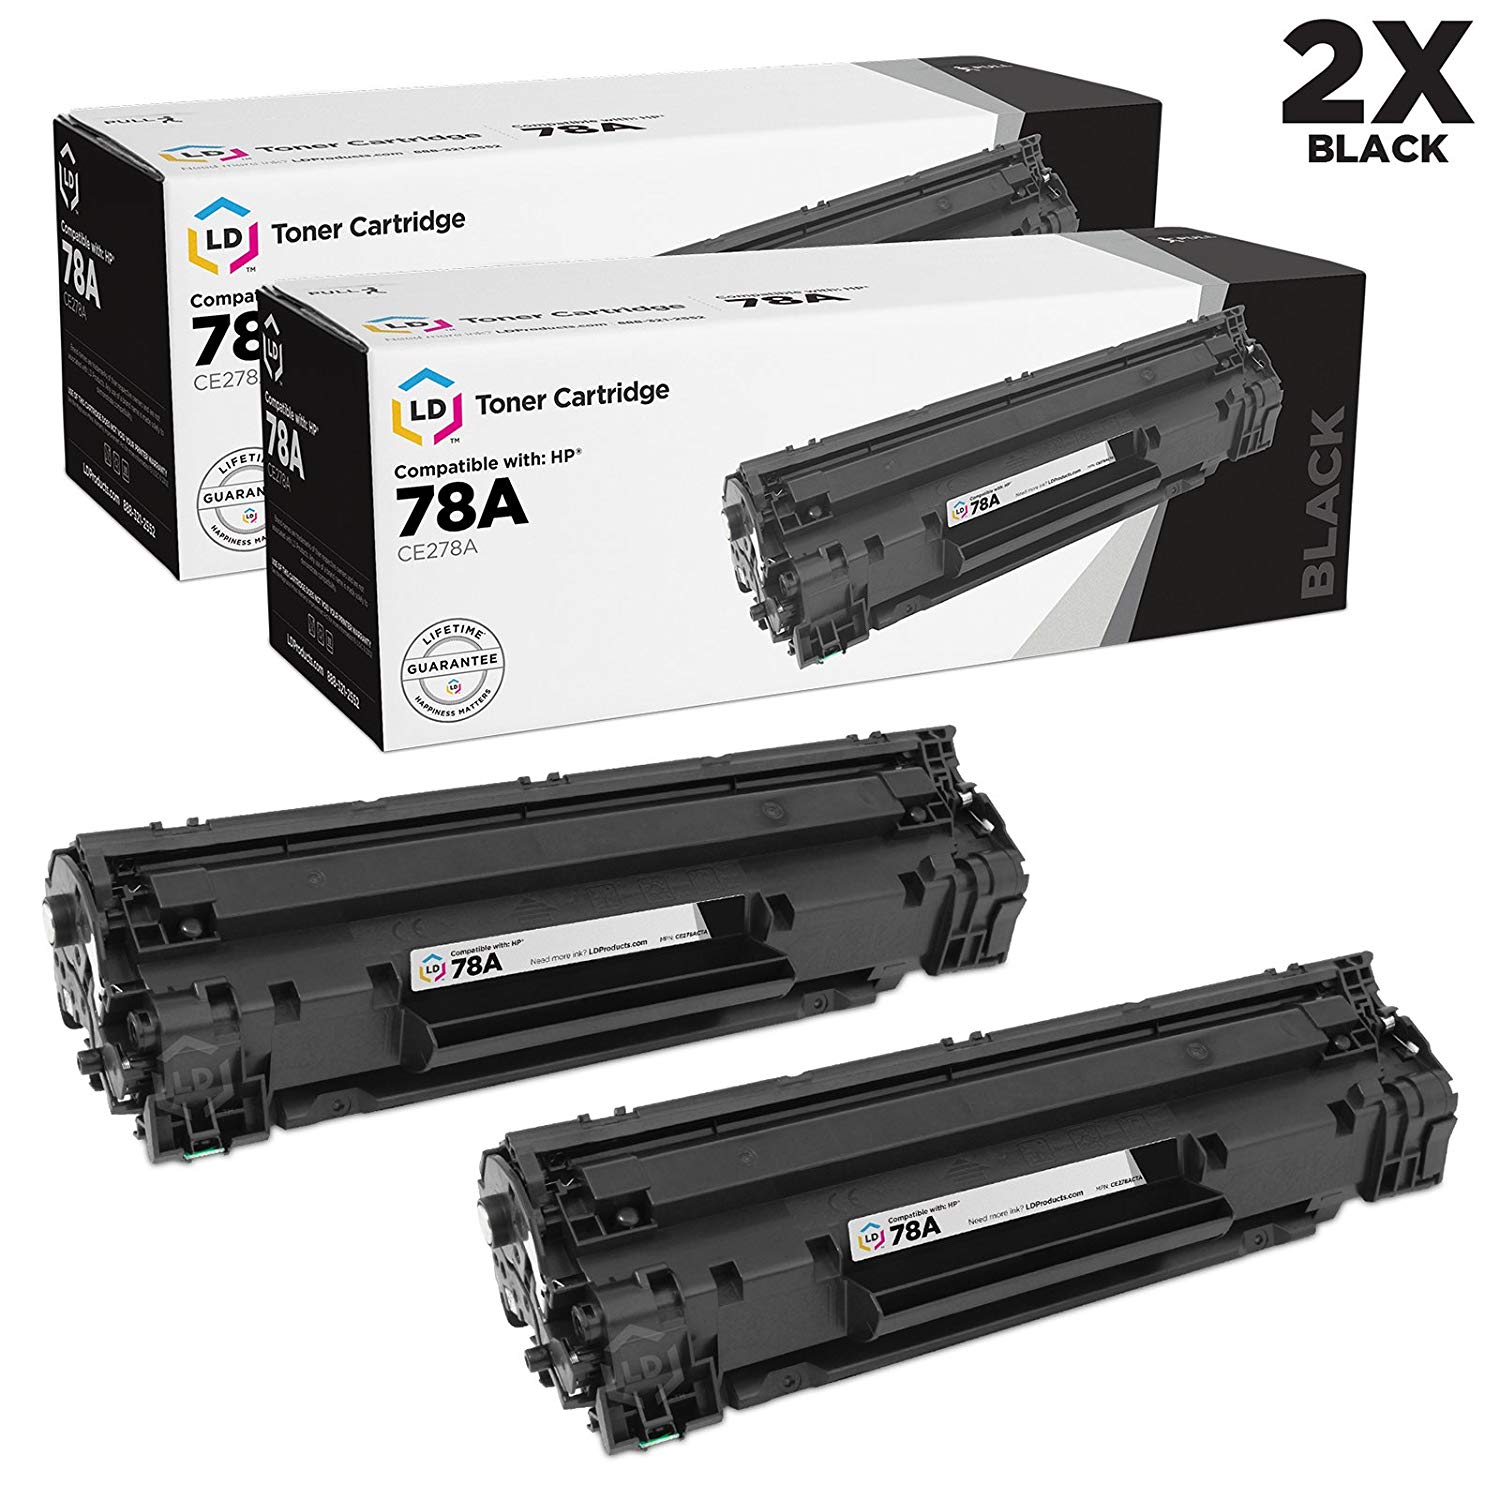 LD Compatible Replacement for HP 78A / HP CE278A Toner Cartridges (Pack of 2) - image 1 of 6